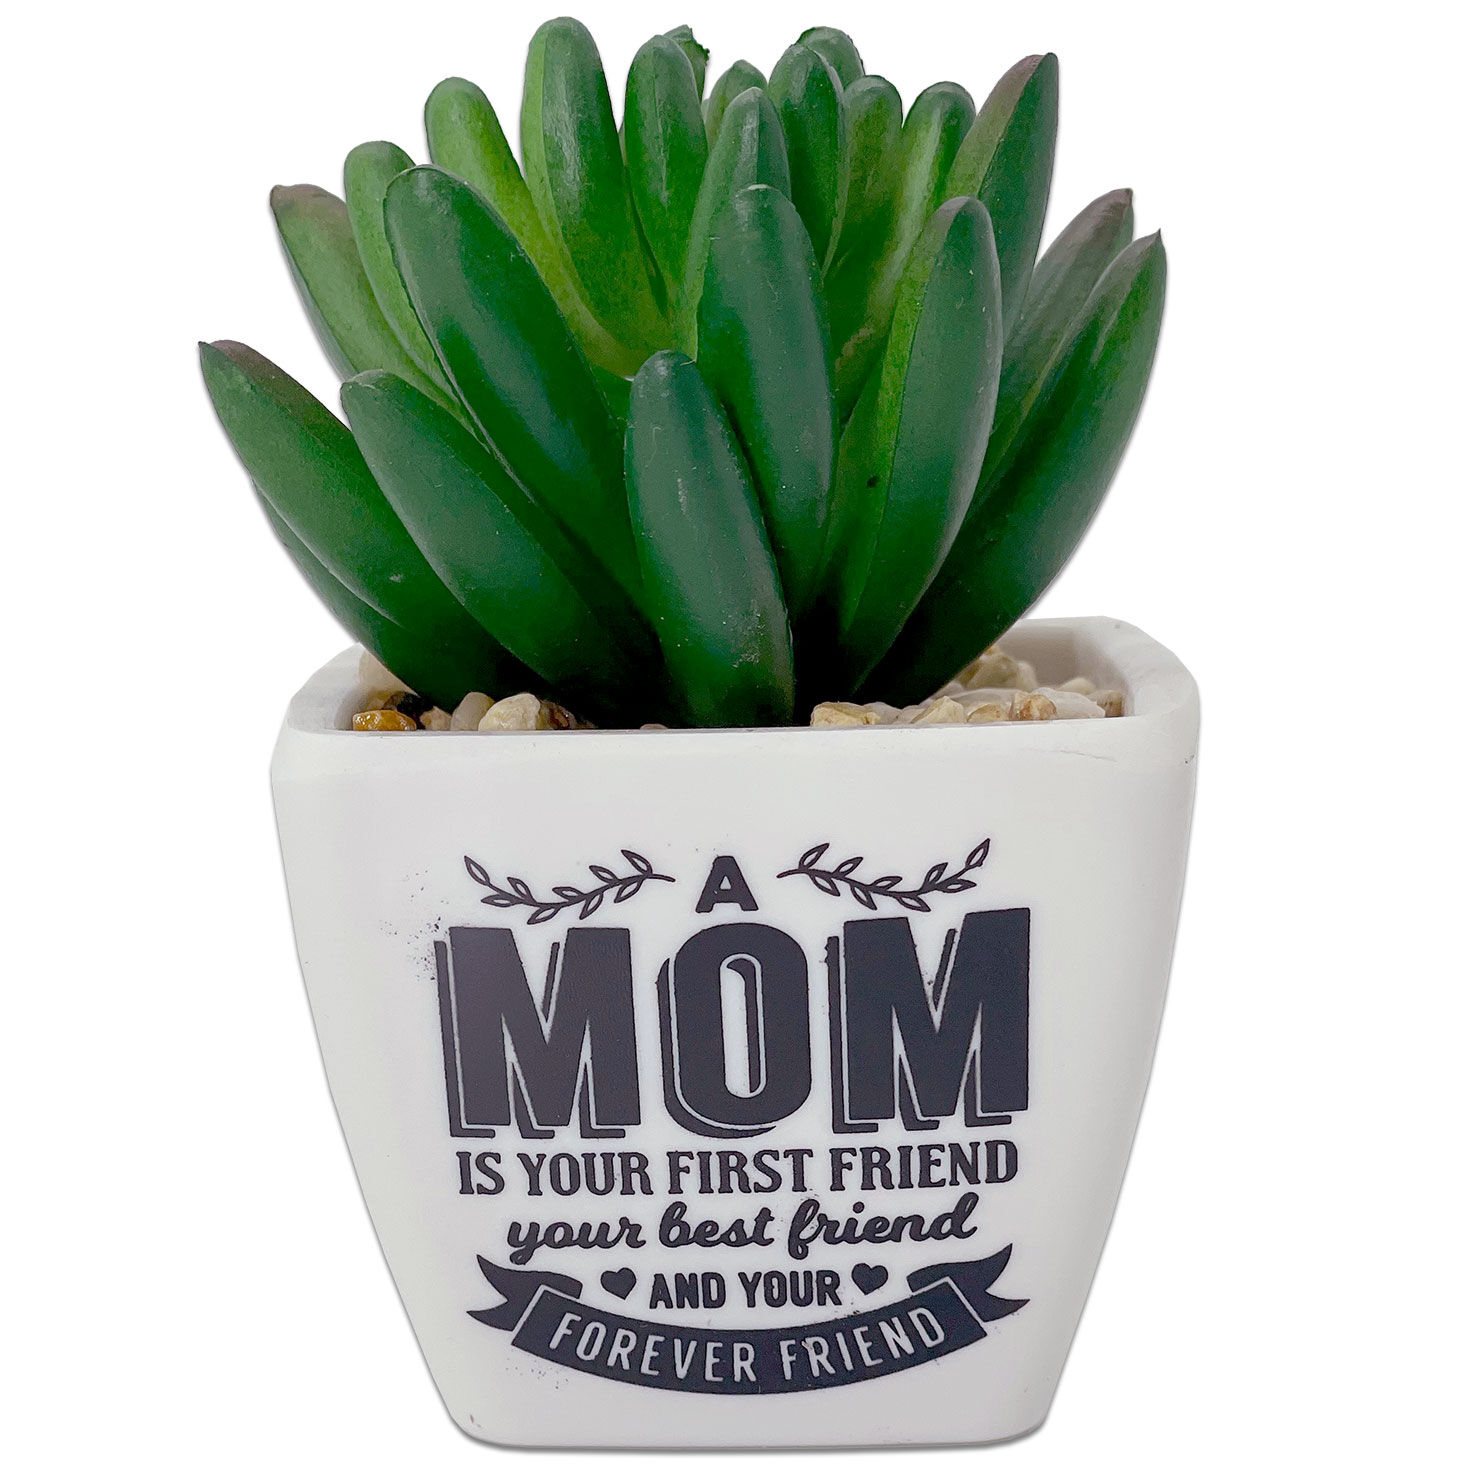 Birthday Gifts Mom - Perfect Mom Birthday Gifts & Mother Birthday Gifts:  Unique Happy Birthday Mom Present, 3 Succulent Pots